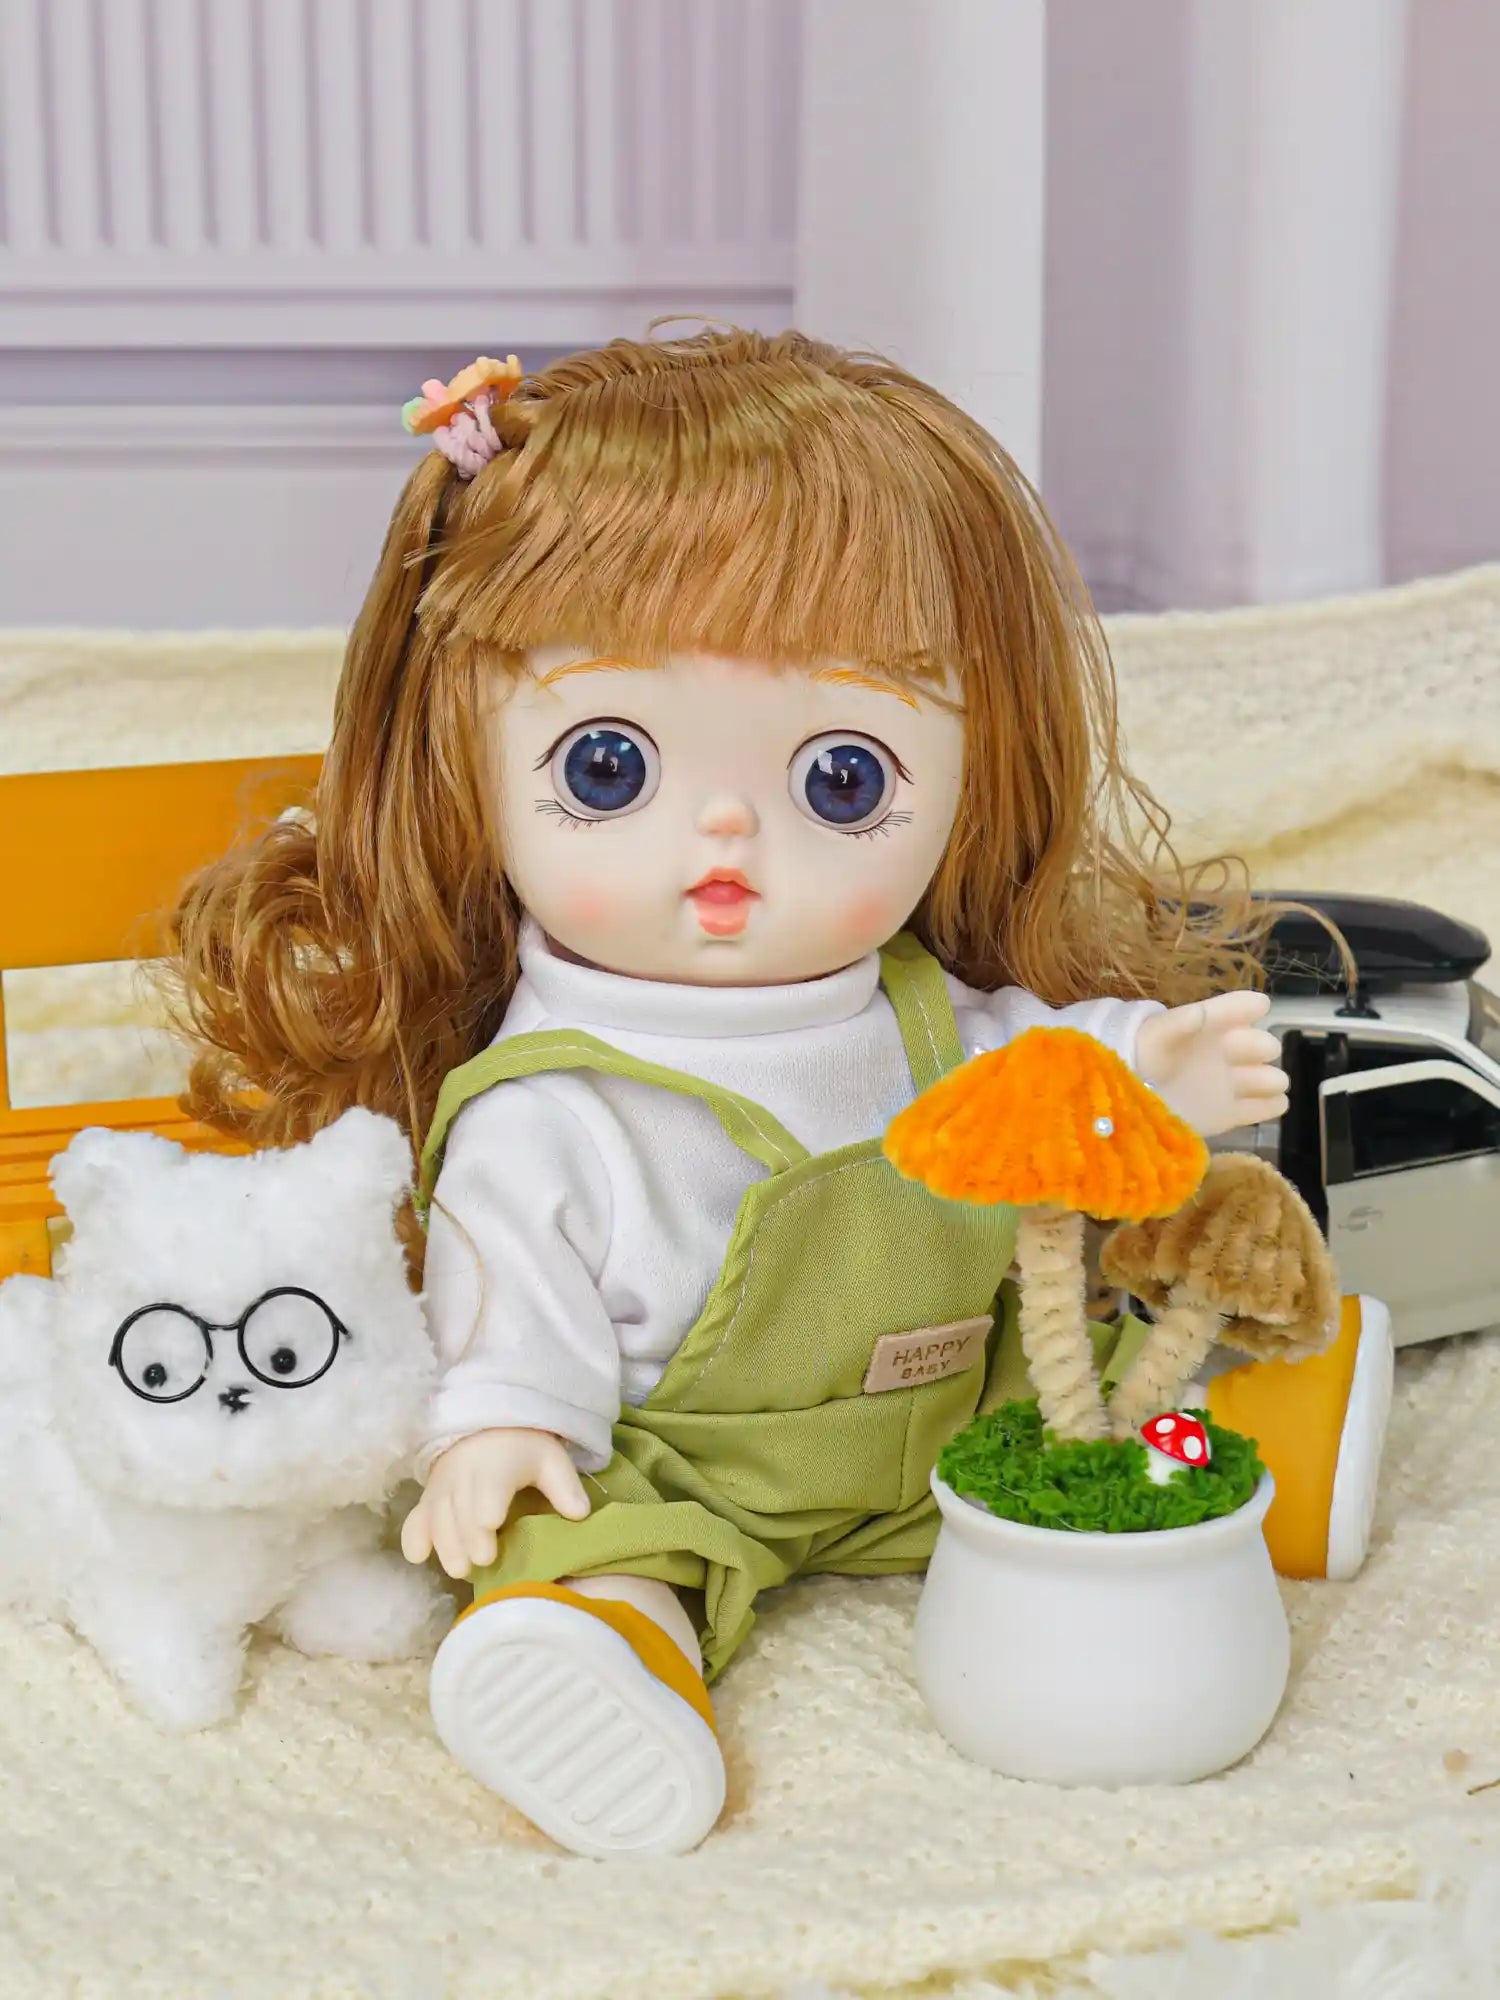 Young doll with flowing hair and outdoor attire, beside a quirky plush cat and a small toy car.